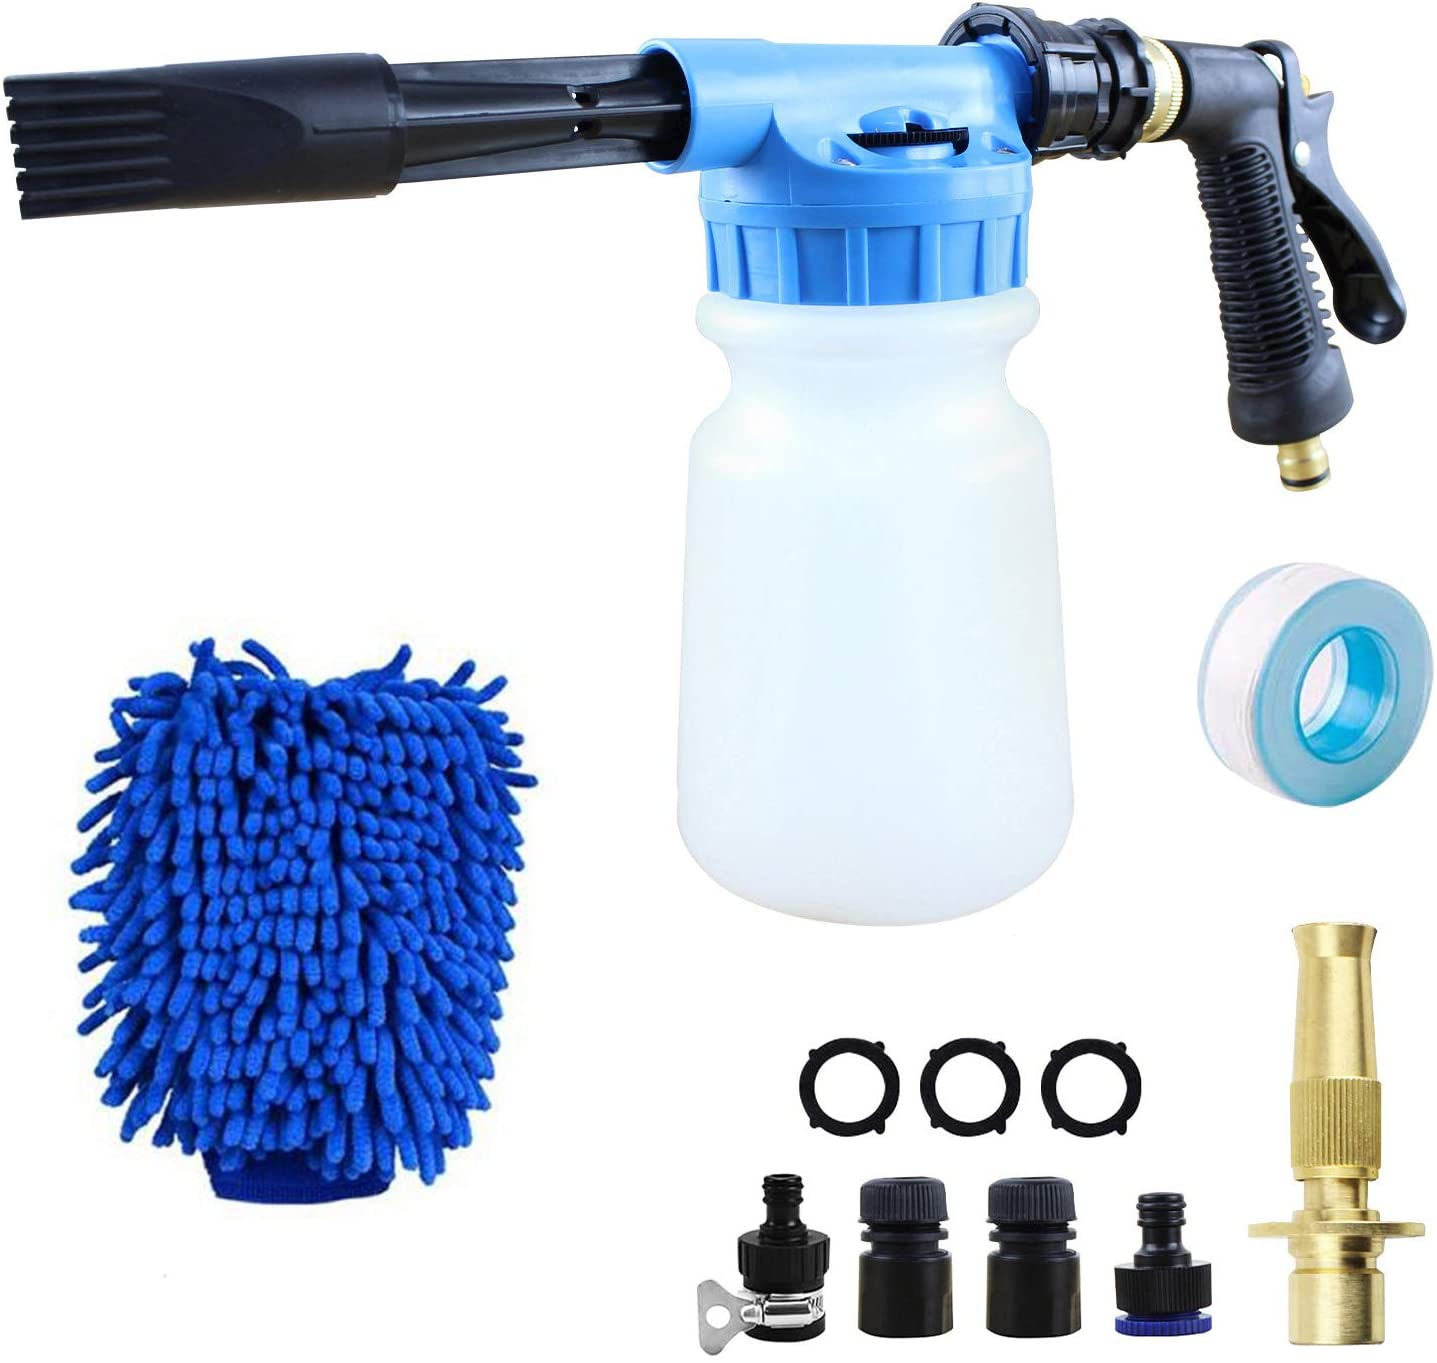 Car Foam Gun Pressure Washer Blaster Hose Wash Sprayer Foam Cannon with Adjustment Ratio Dial for Car Home Cleaning Garden with 0.26 Gallon Bottle